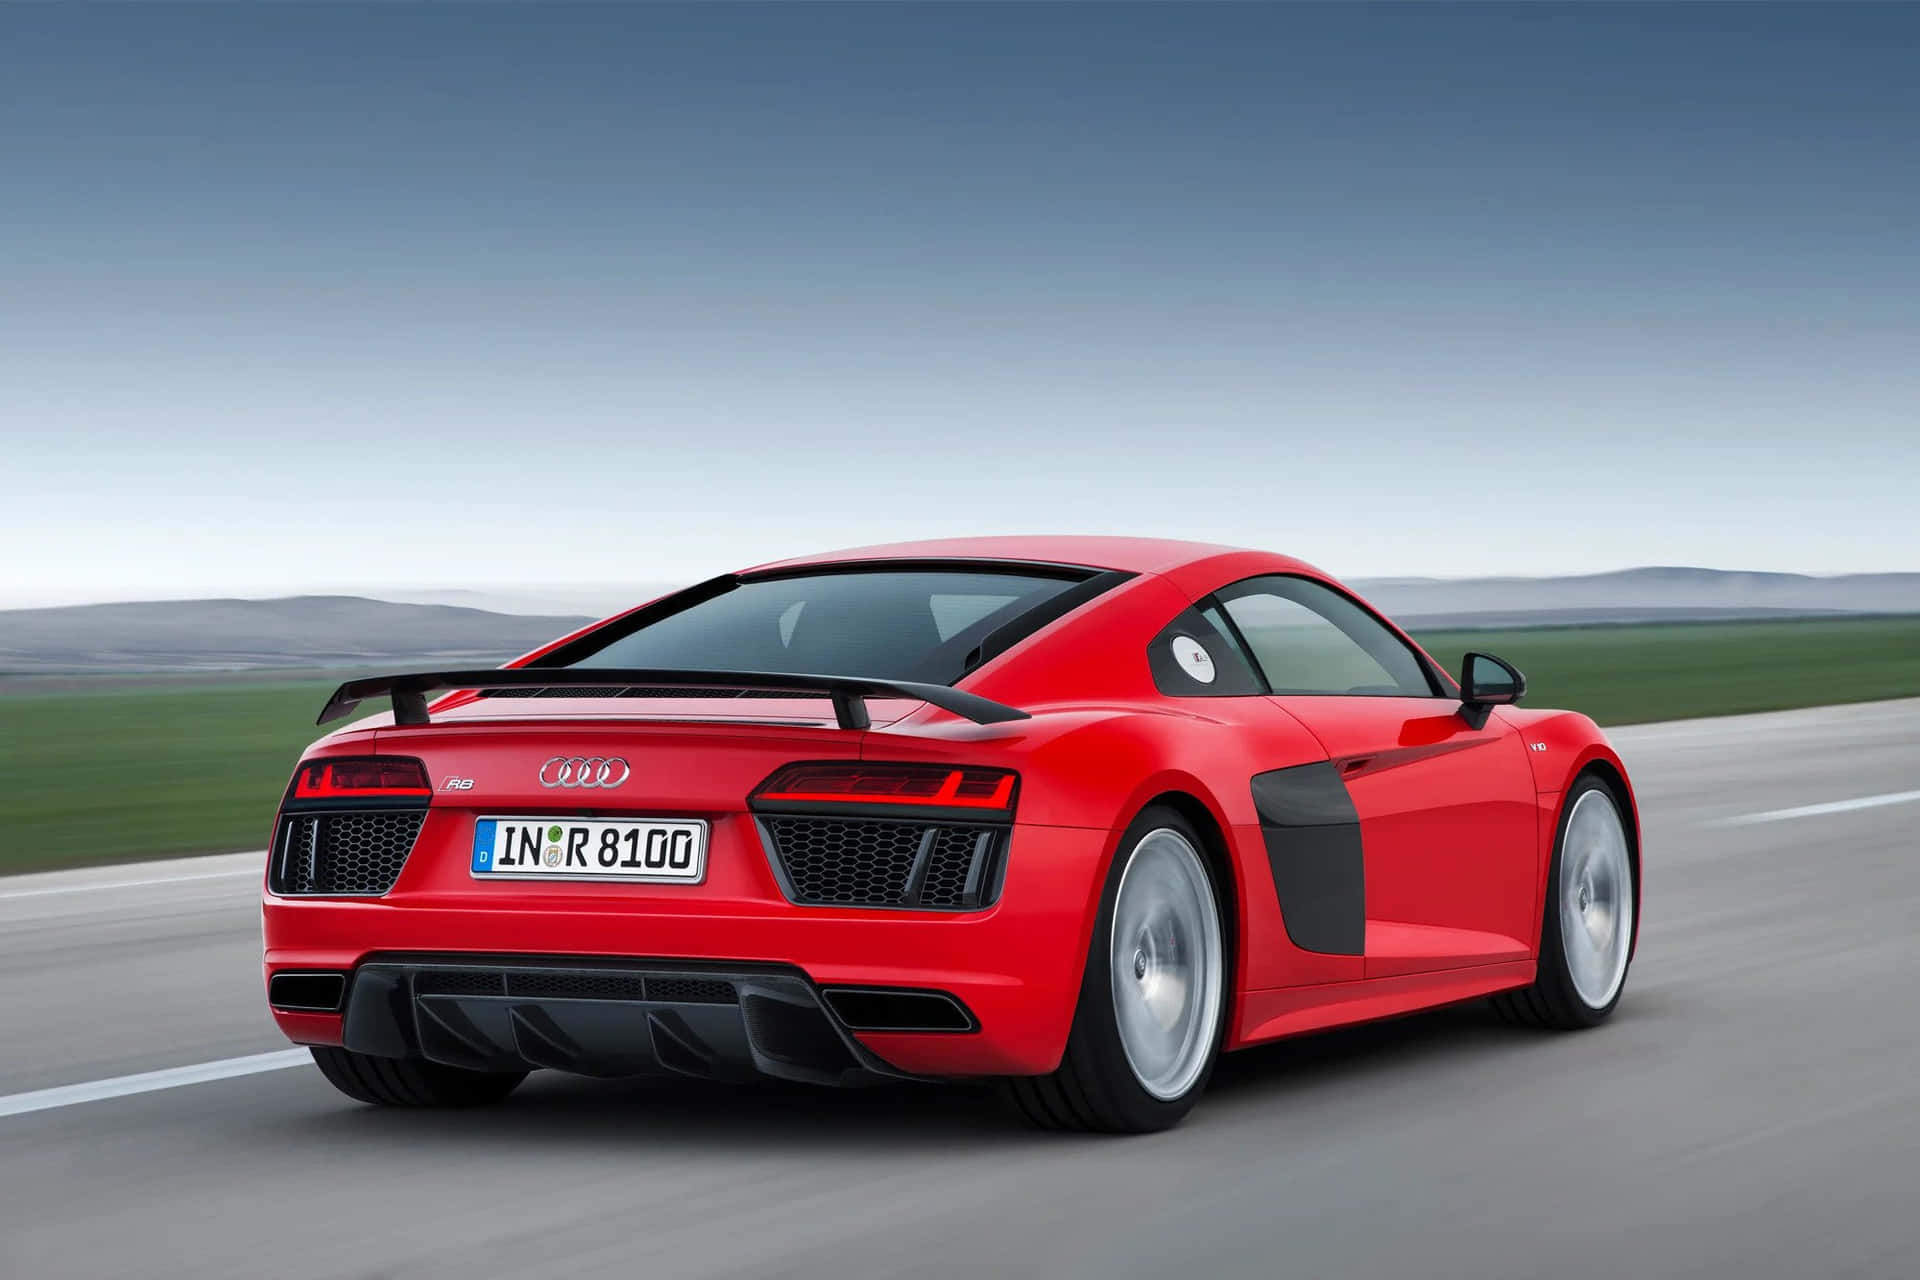 Ride in Style in an Audi R8